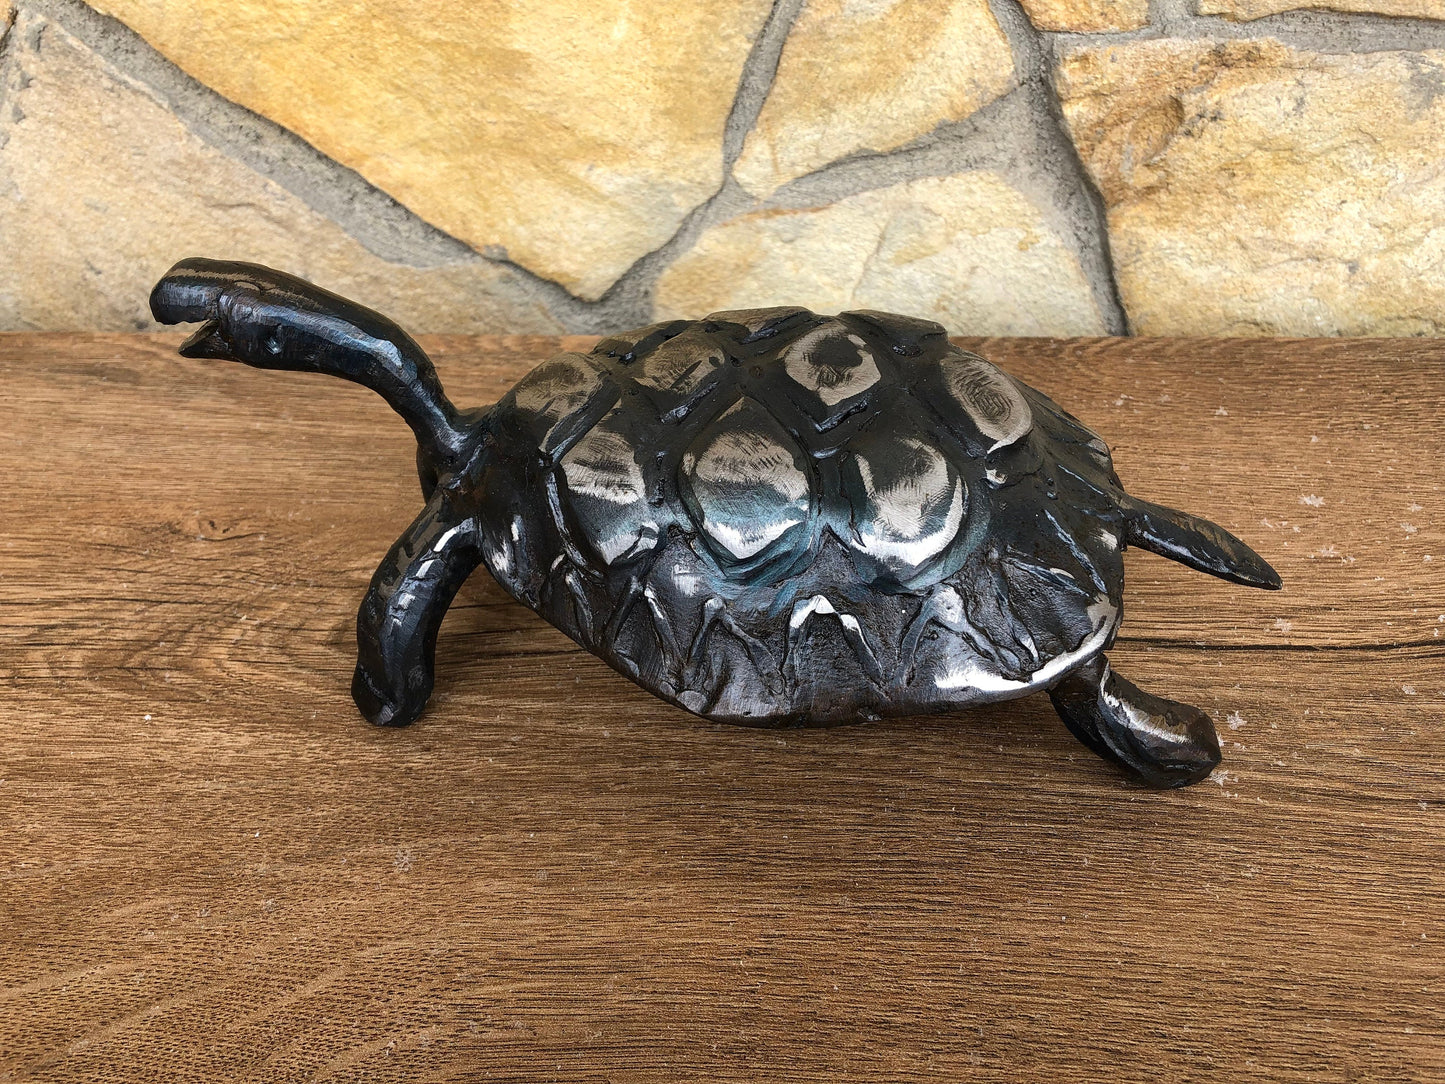 Turtle, hand forged turtle, turtle gifts, tropical beach decor, nautical decor, turtle figurine, wildlife, amphibians, iron gift, mens gifts